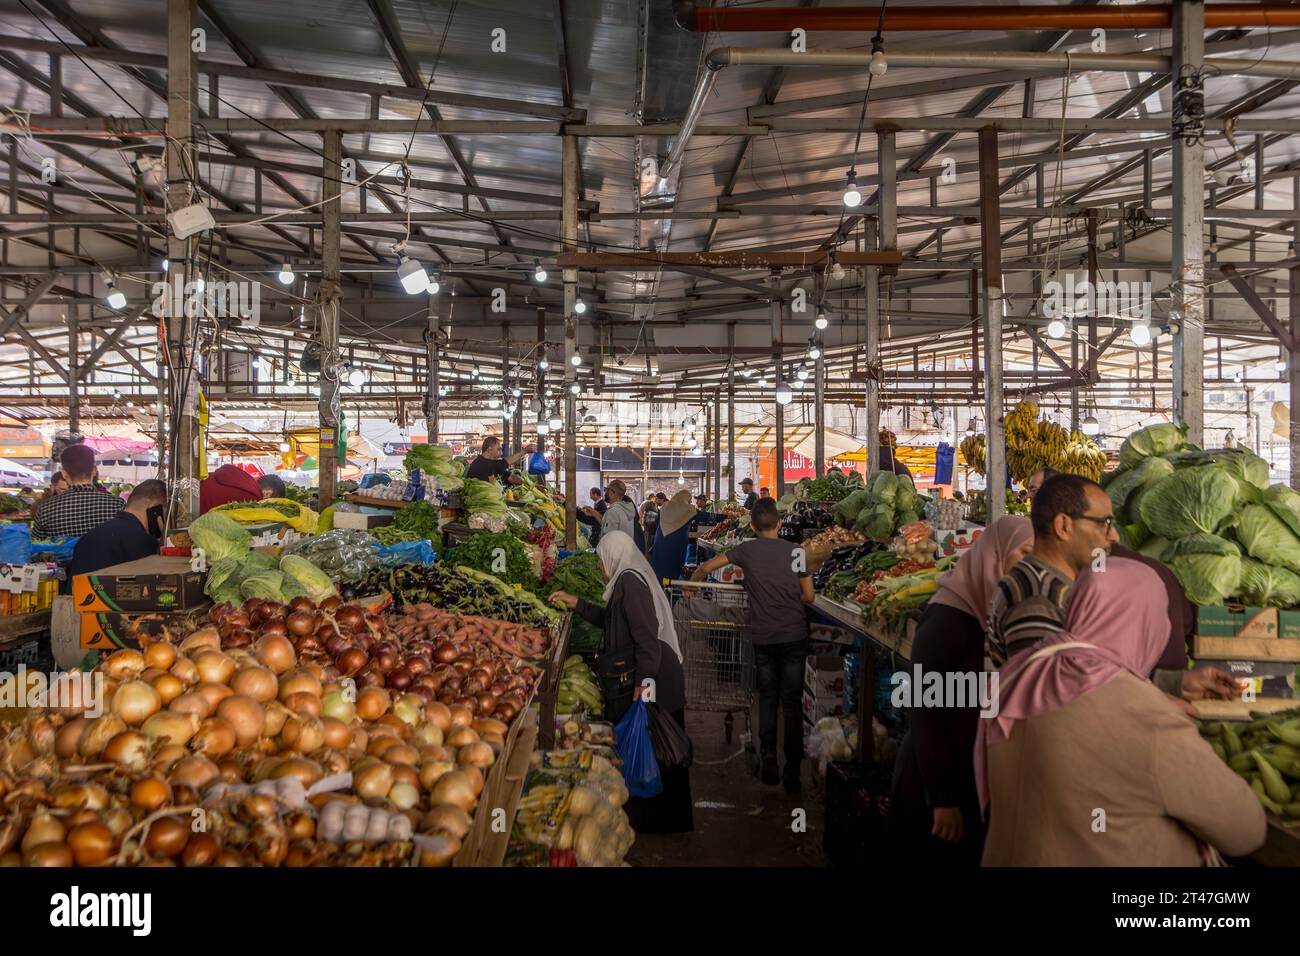 The people at food market with bananas, tomatoes, and other fruits and vegetables, at bazaar of Ramallah, the capital of Palestinian West Bank. Stock Photo